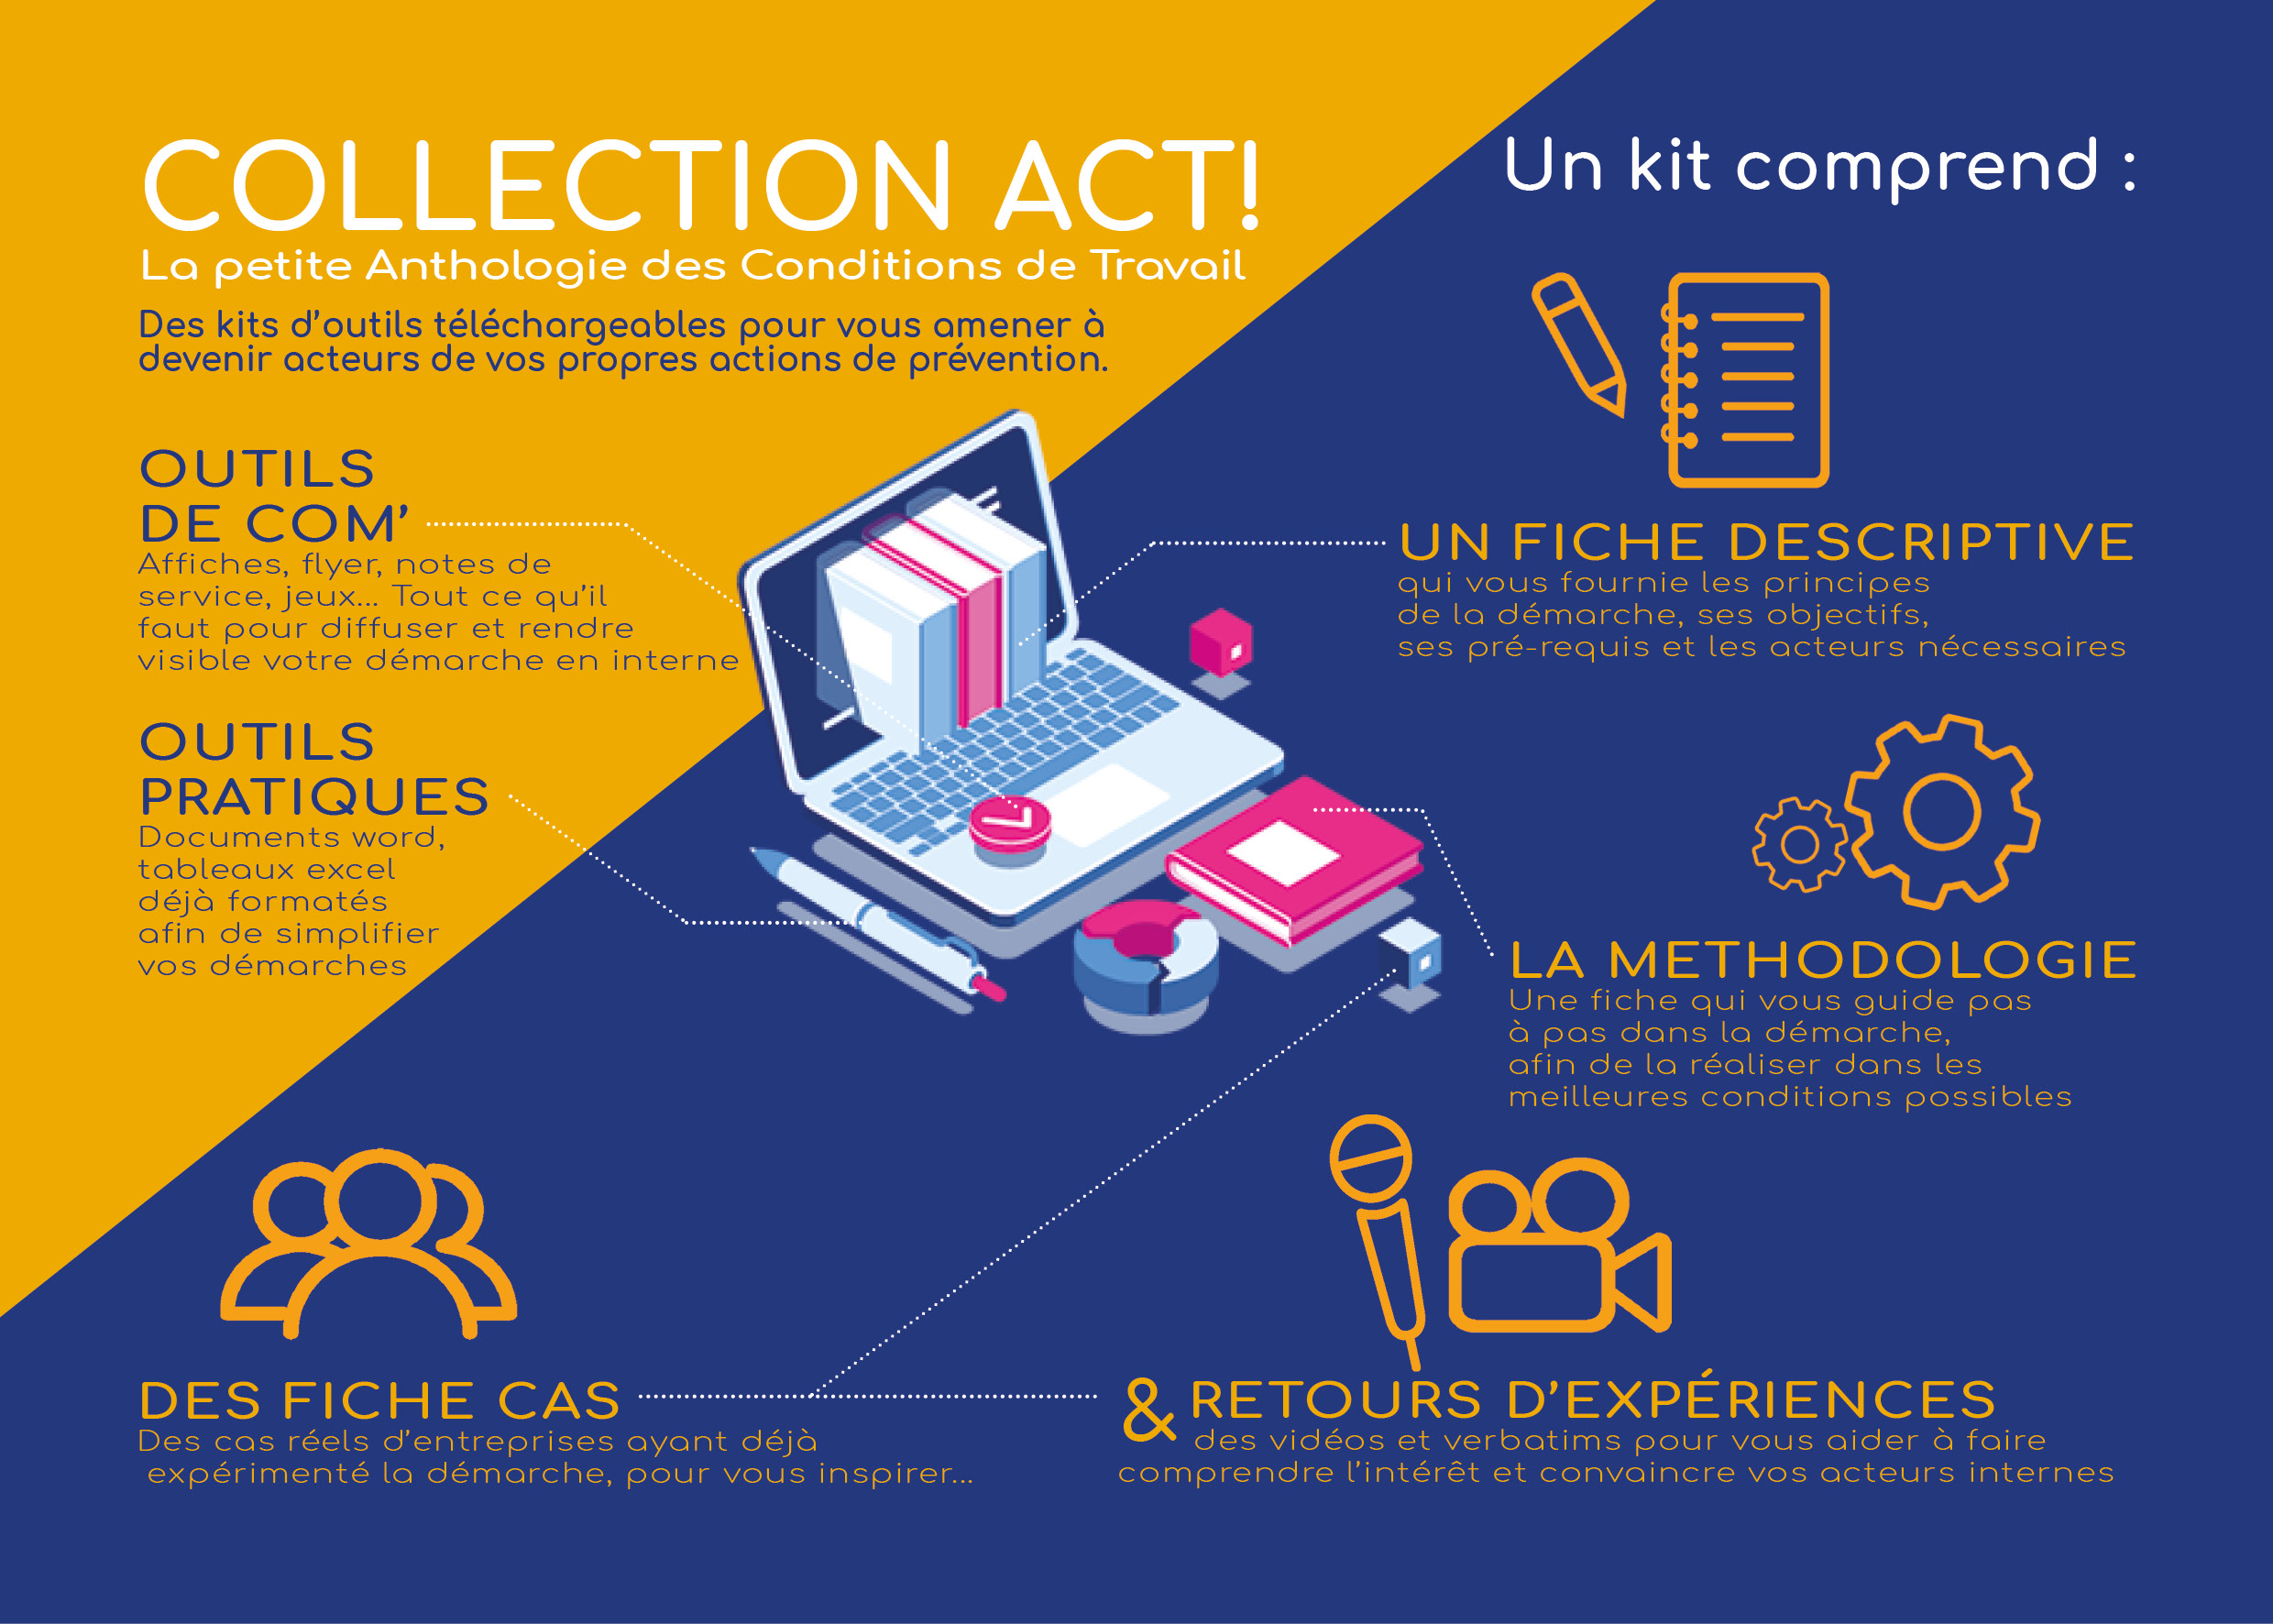 collection Act!